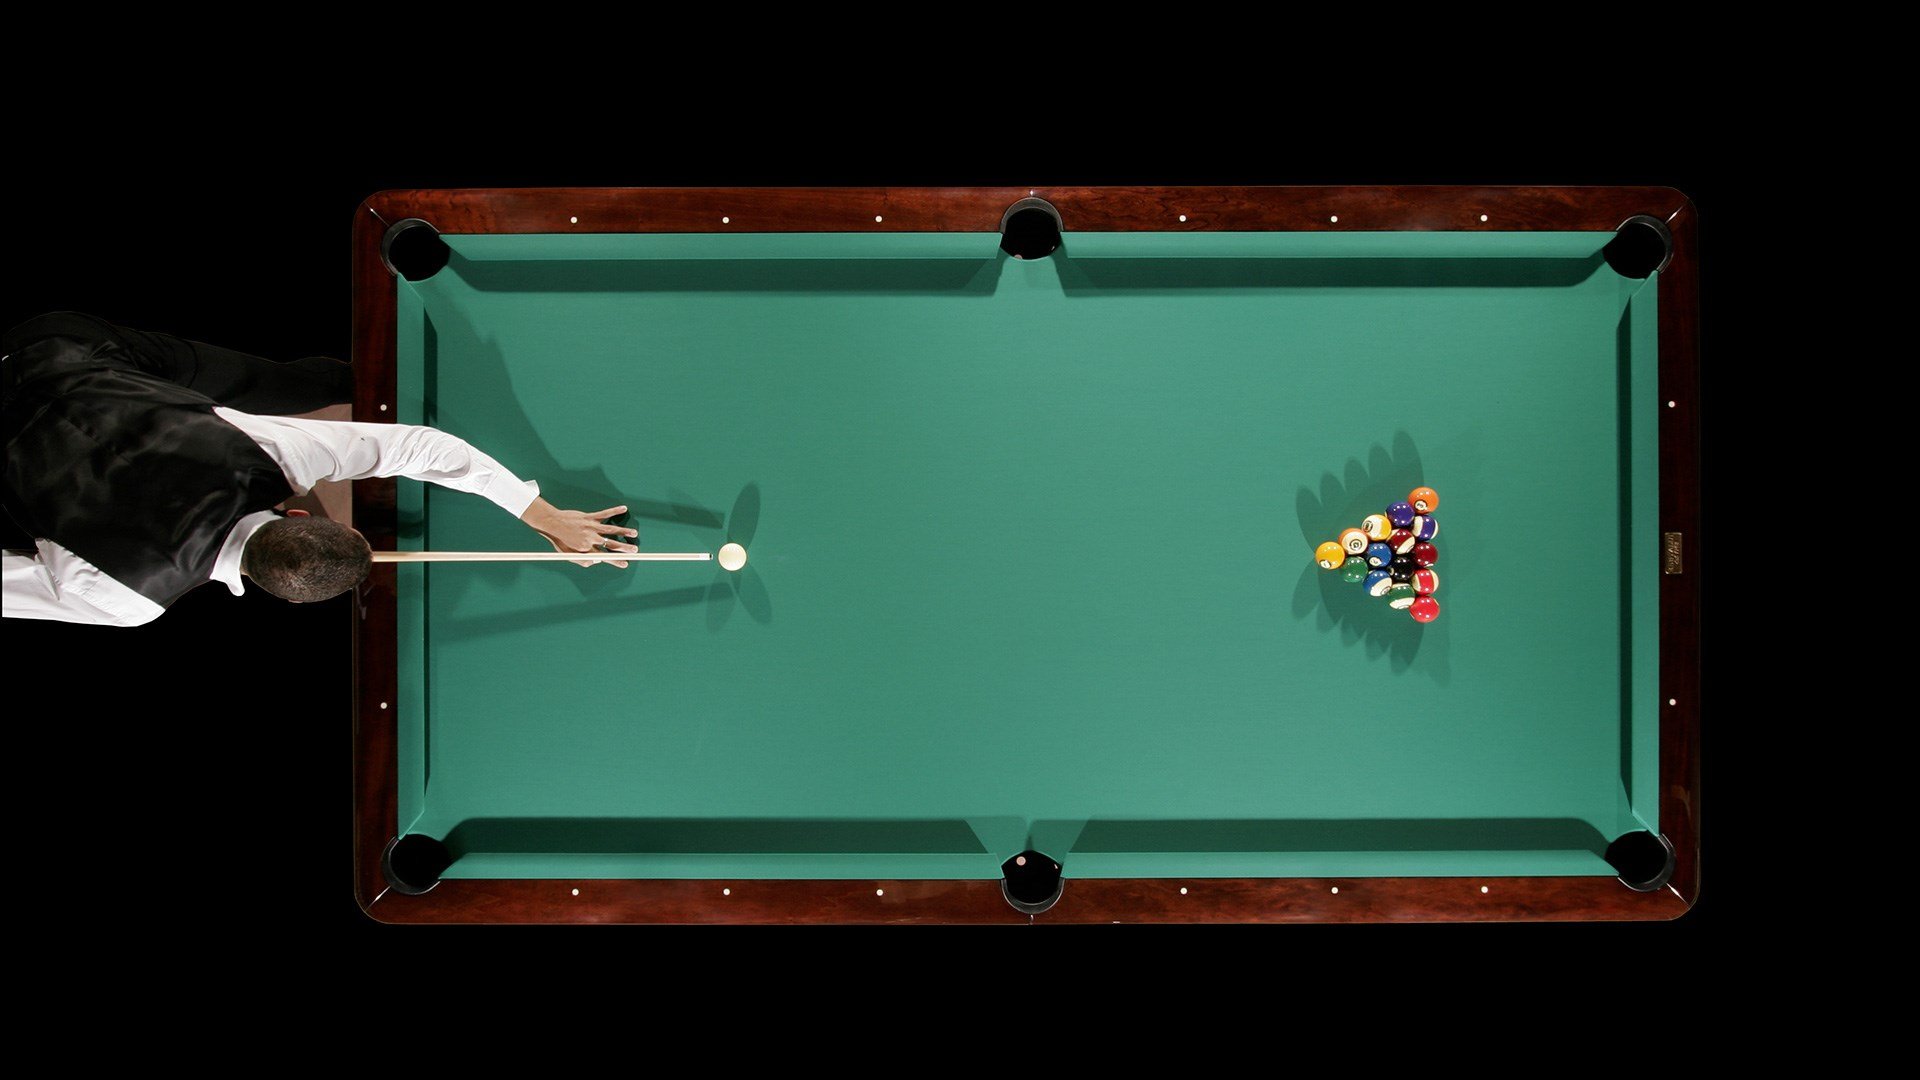 American Billiards Games: Discover the Specialities and Download the Rules.